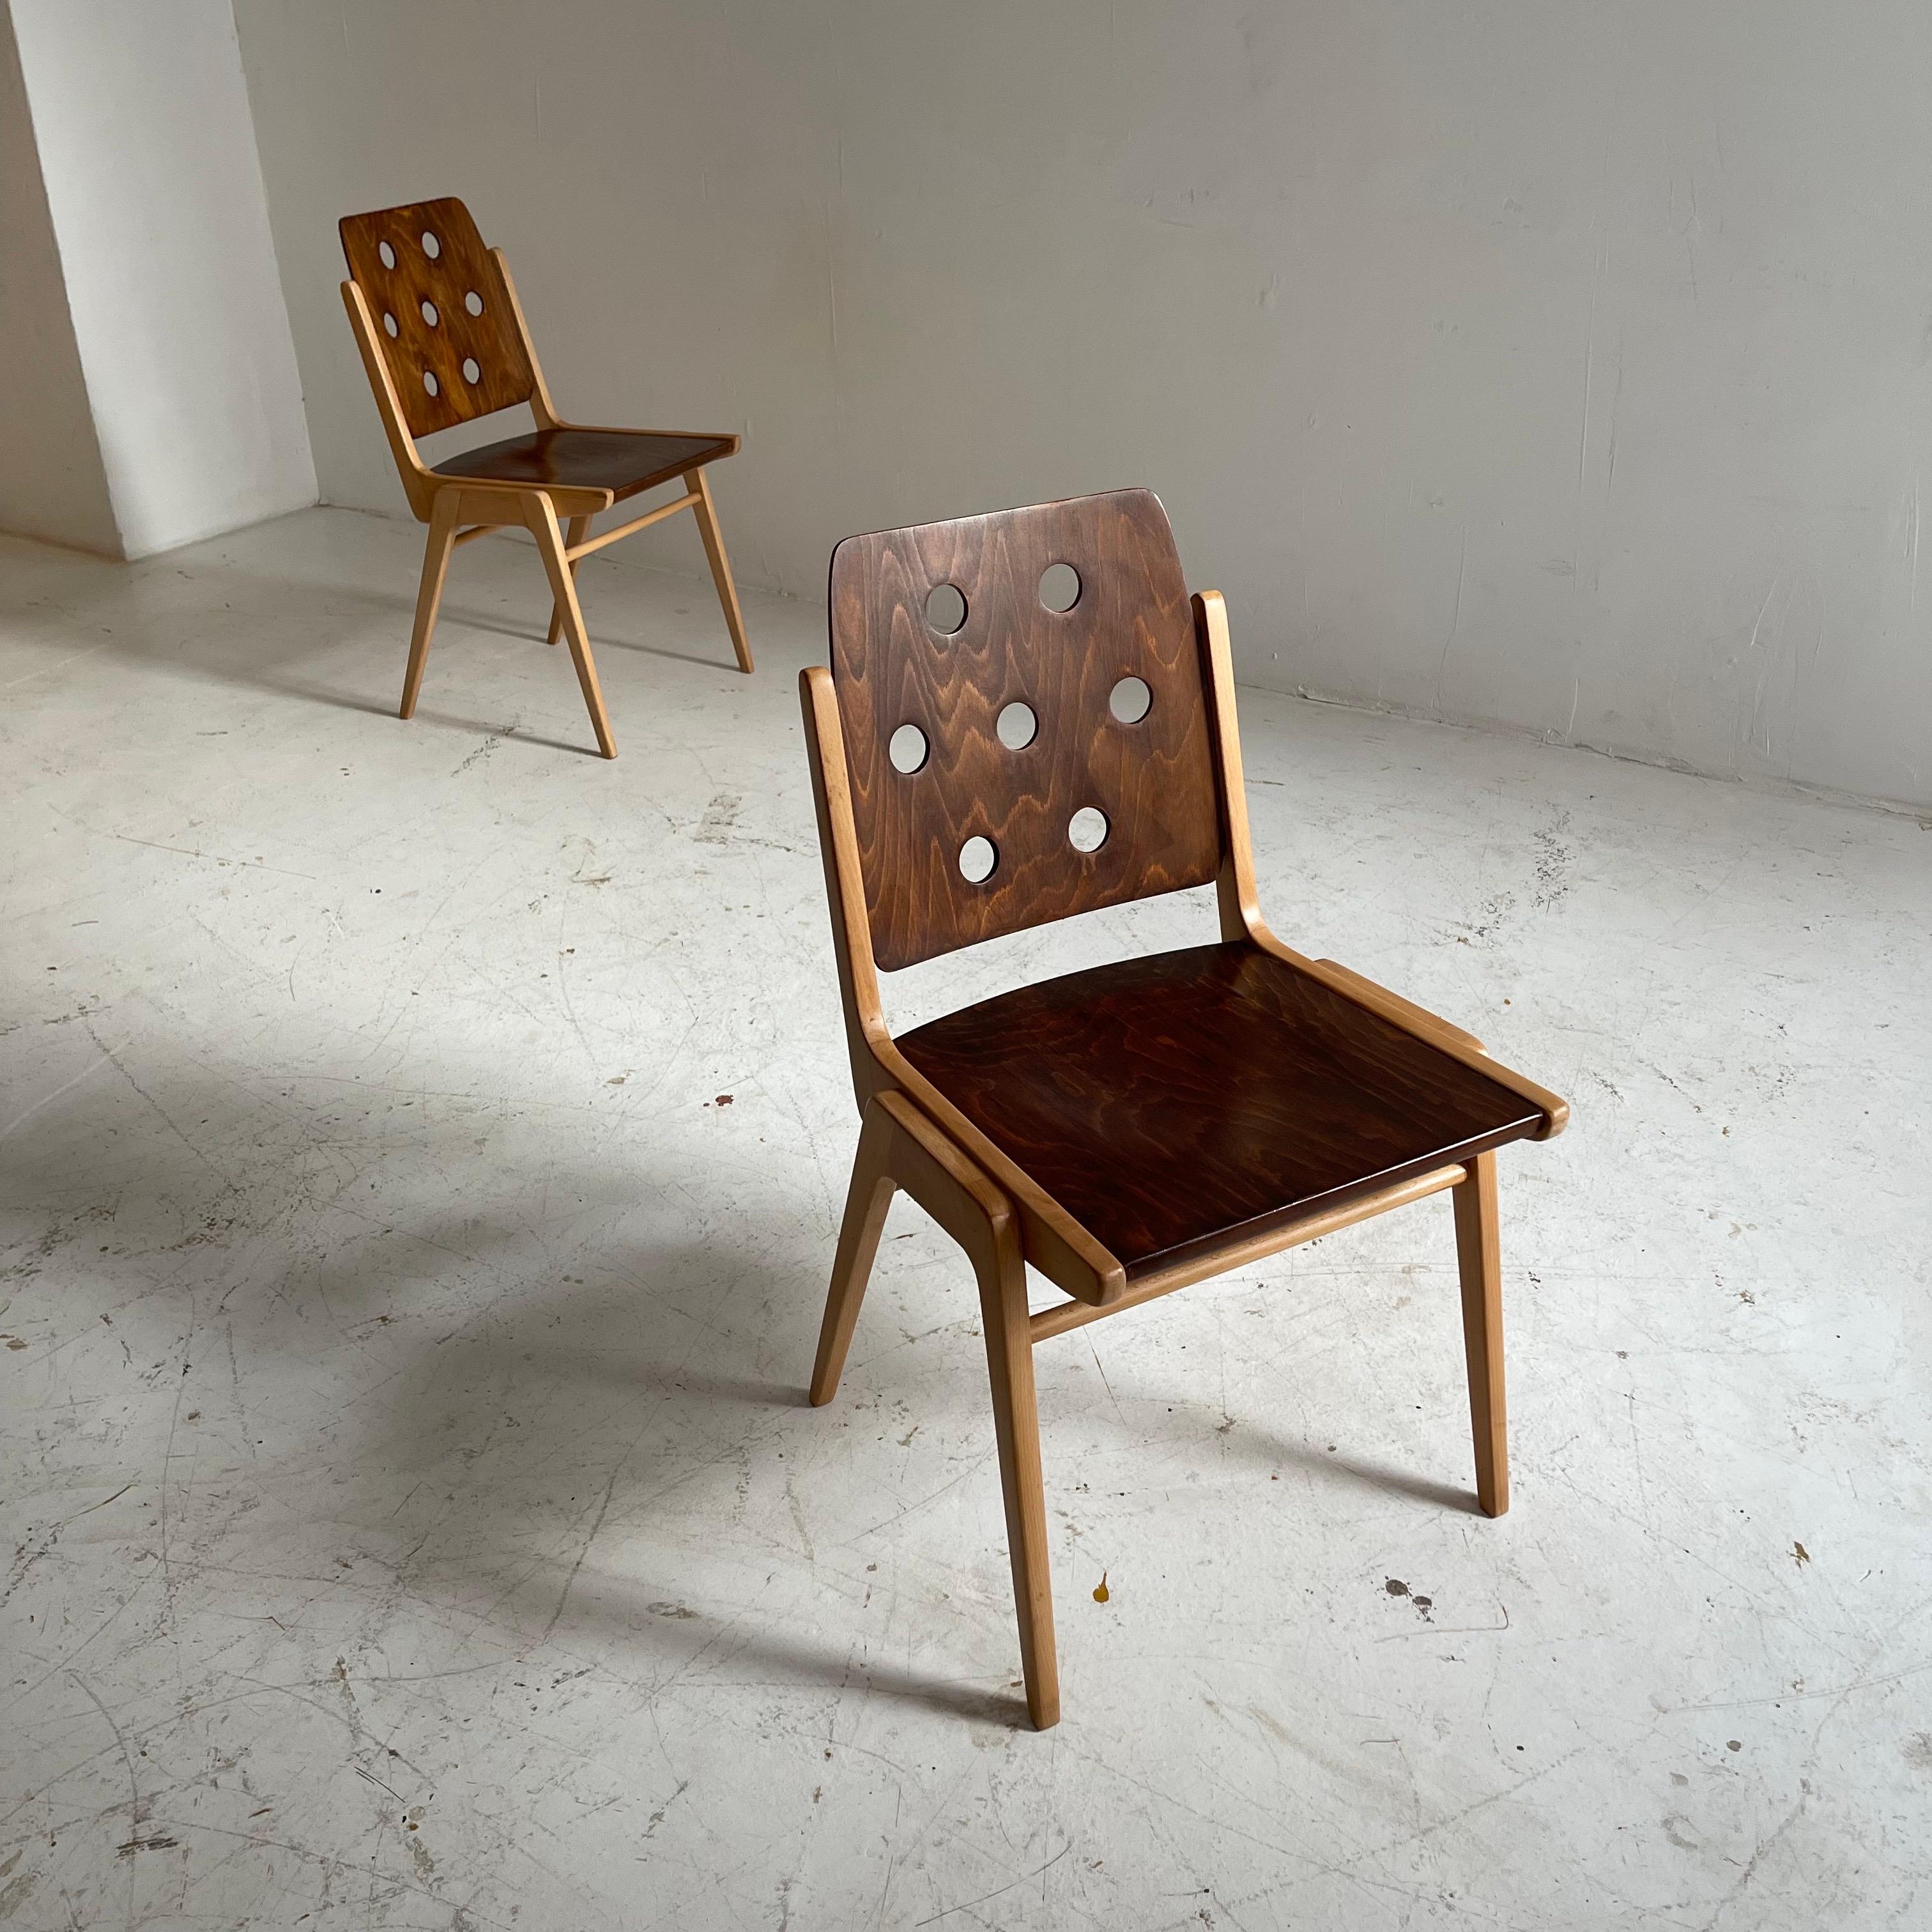 Franz Schuster Stacking Chair Set of Two, Austria 1955 For Sale 4